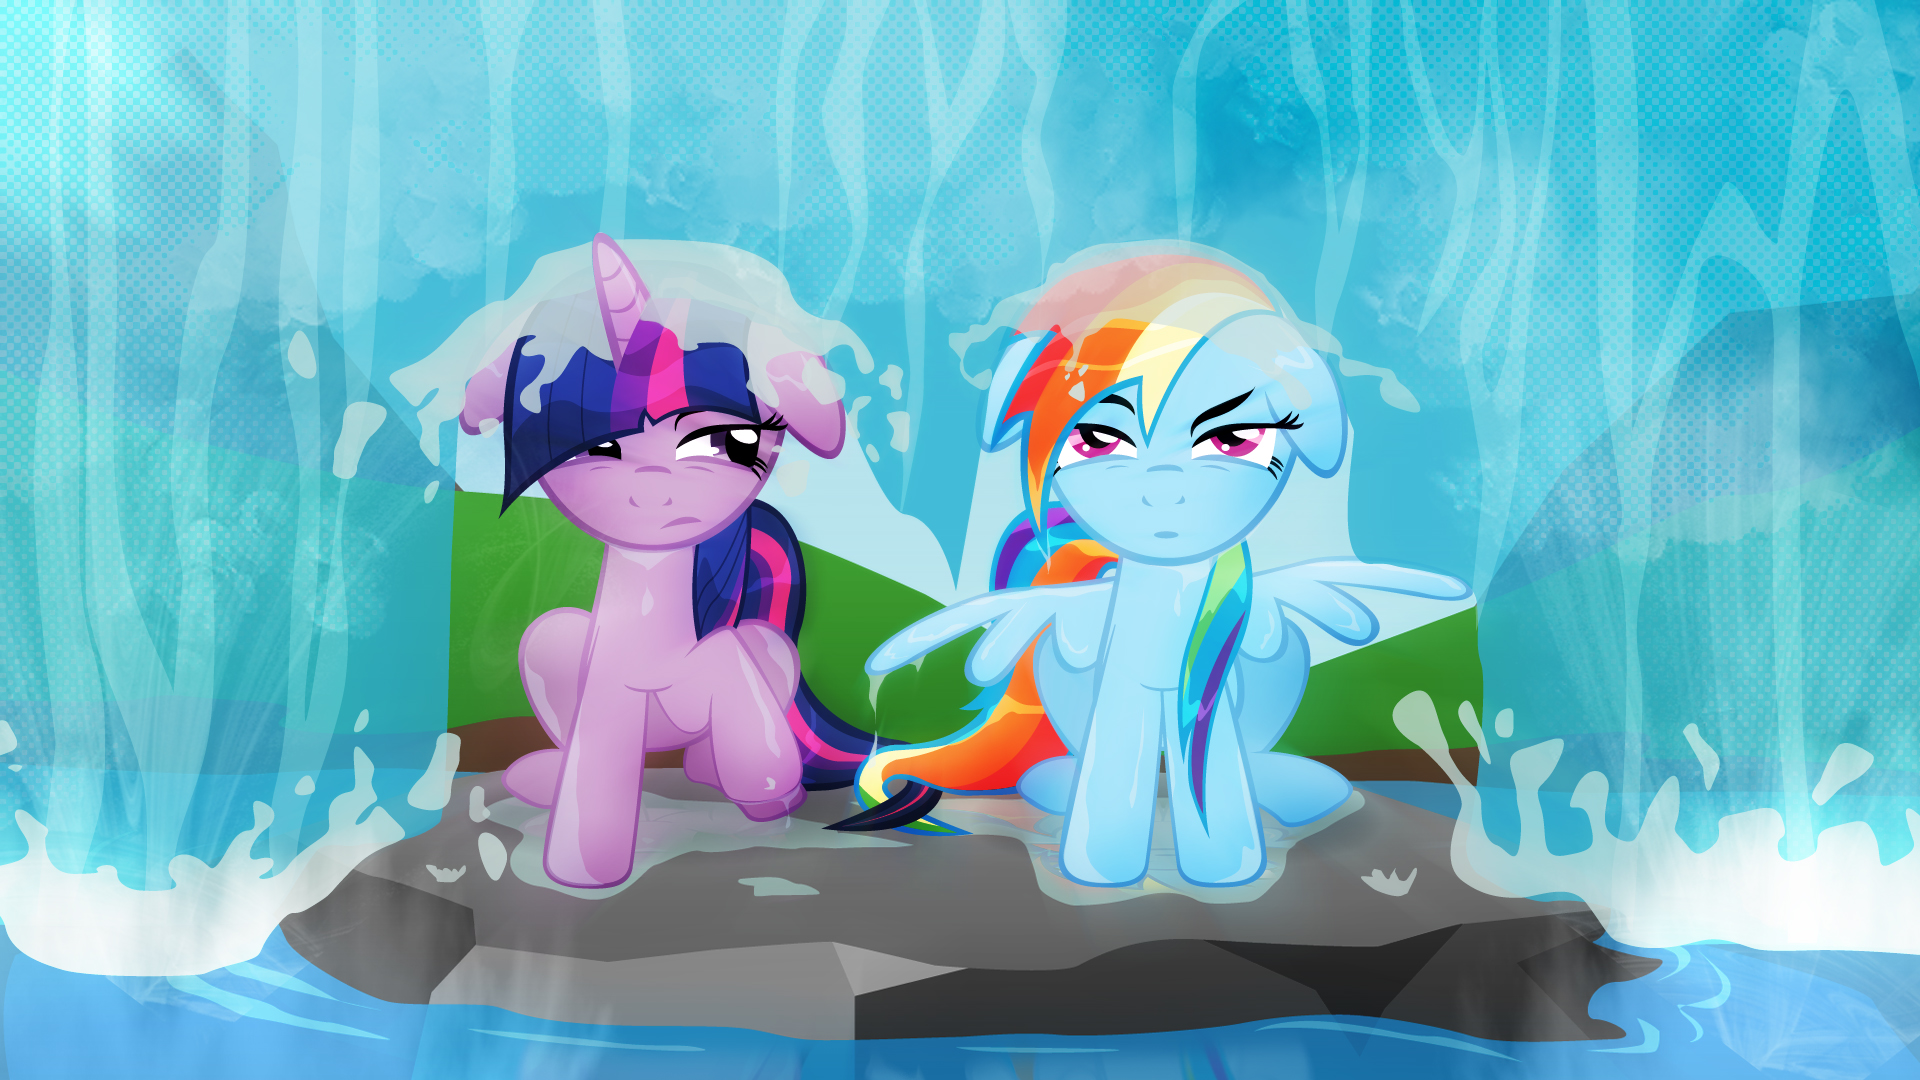 Twilight and Dashie ~The Waterfall non Font by Rariedash